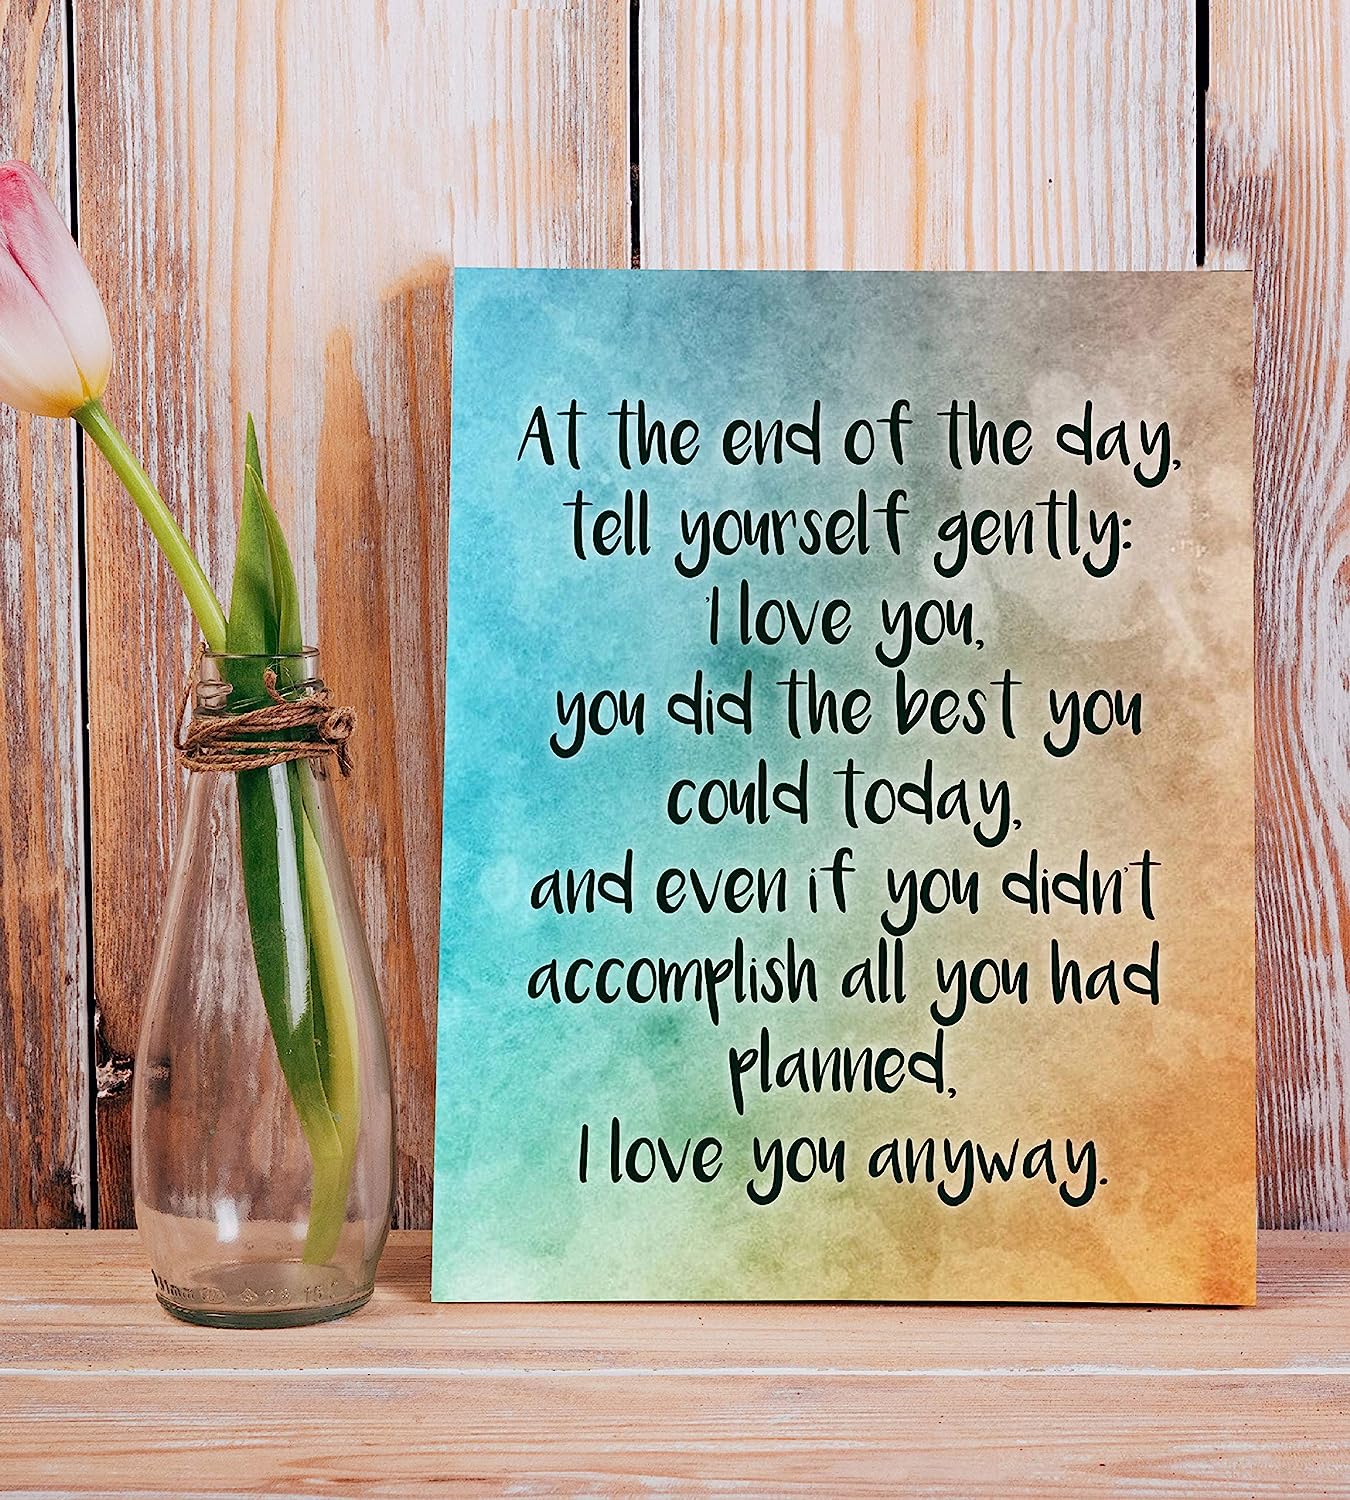 At End of Day Tell Yourself Gently-I Love You Inspirational Quotes Wall Sign -8 x 10" Modern Typographic Art Print-Ready to Frame. Home-Office-School Decor. Great Gift to Inspire Self-Love!